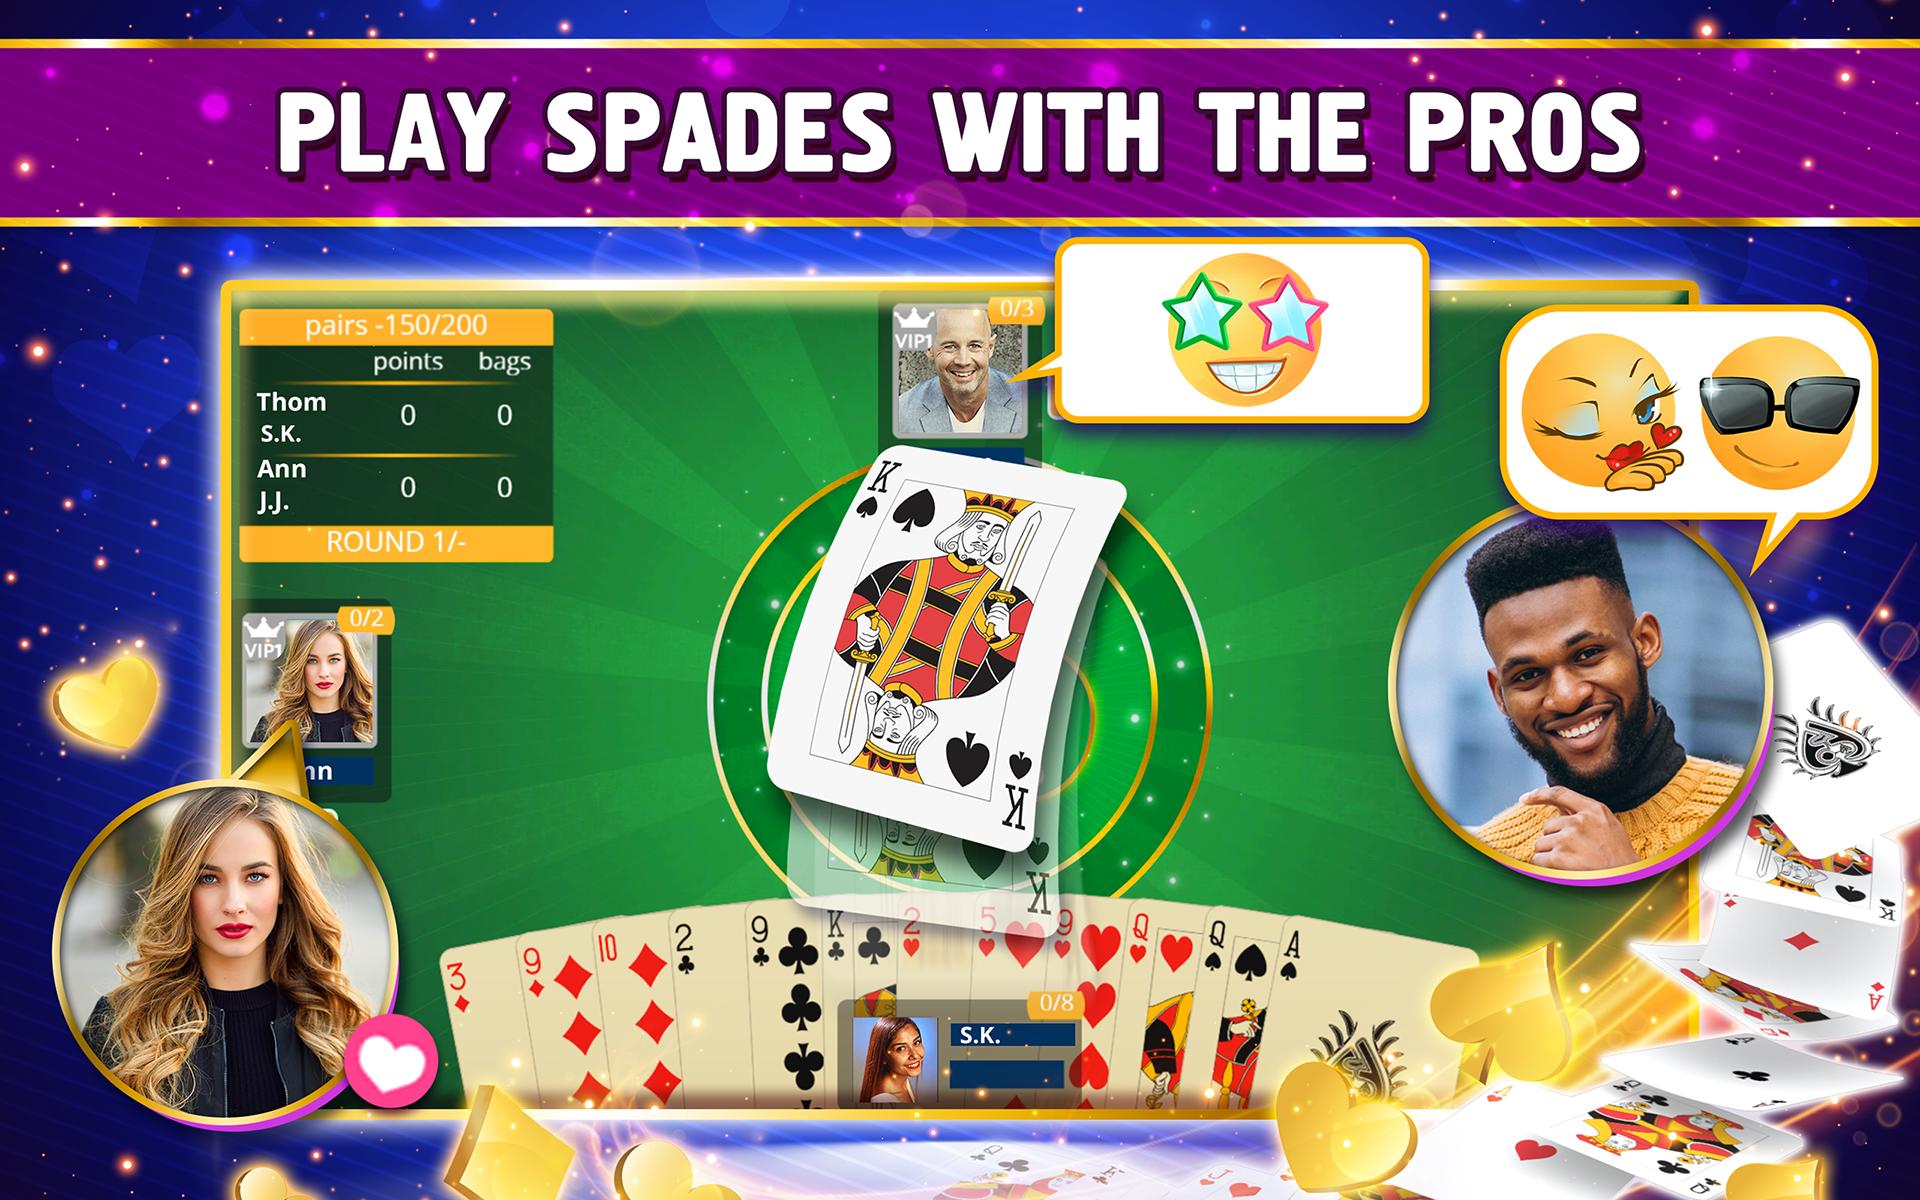 VIP Spades for Android - APK Download